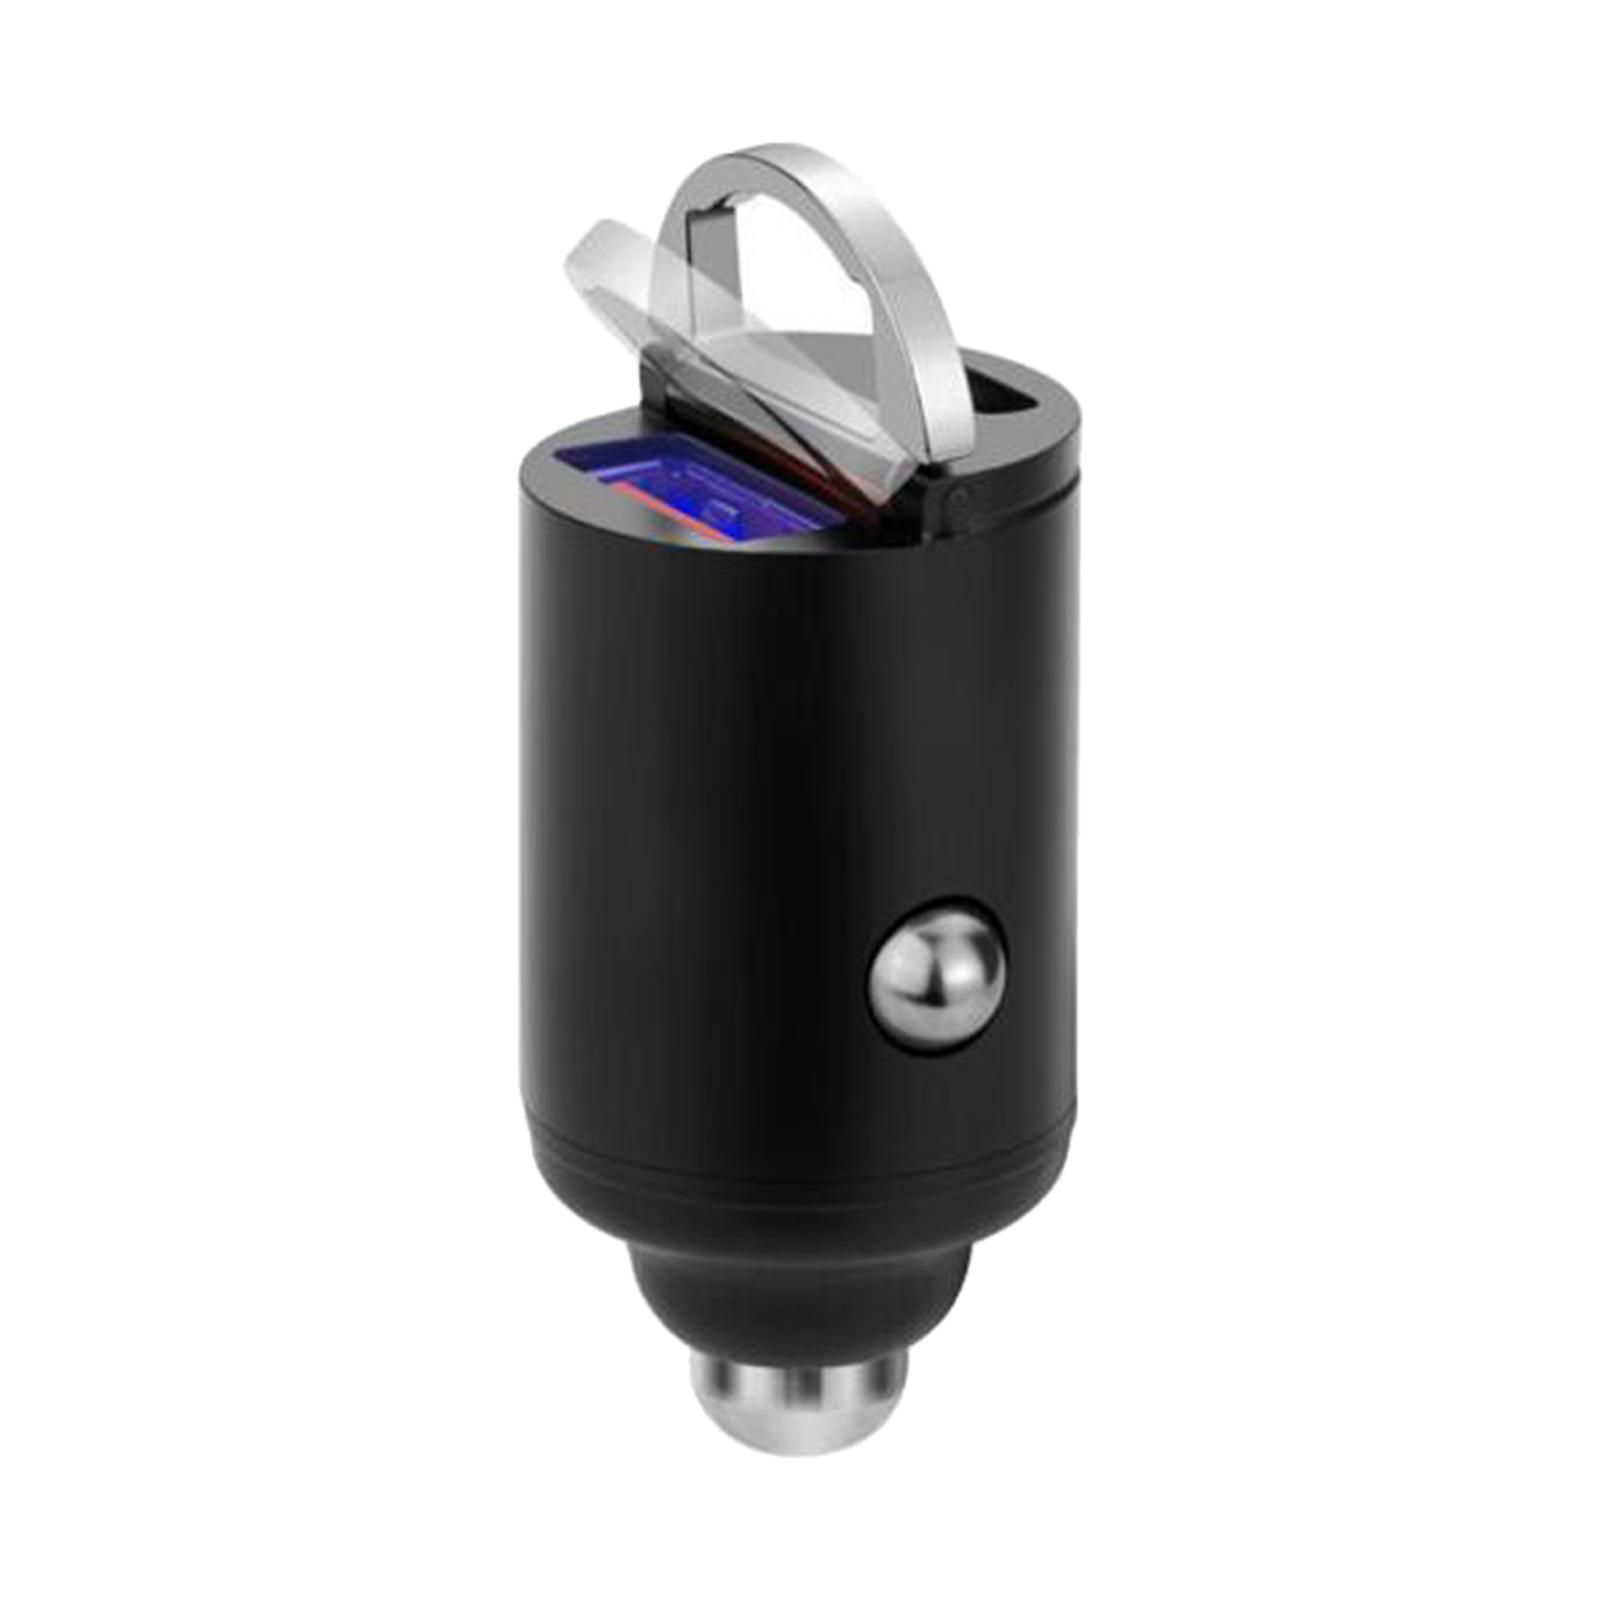 Mini Car Charger Accessories Adapter for Digital Cameras Game Consoles